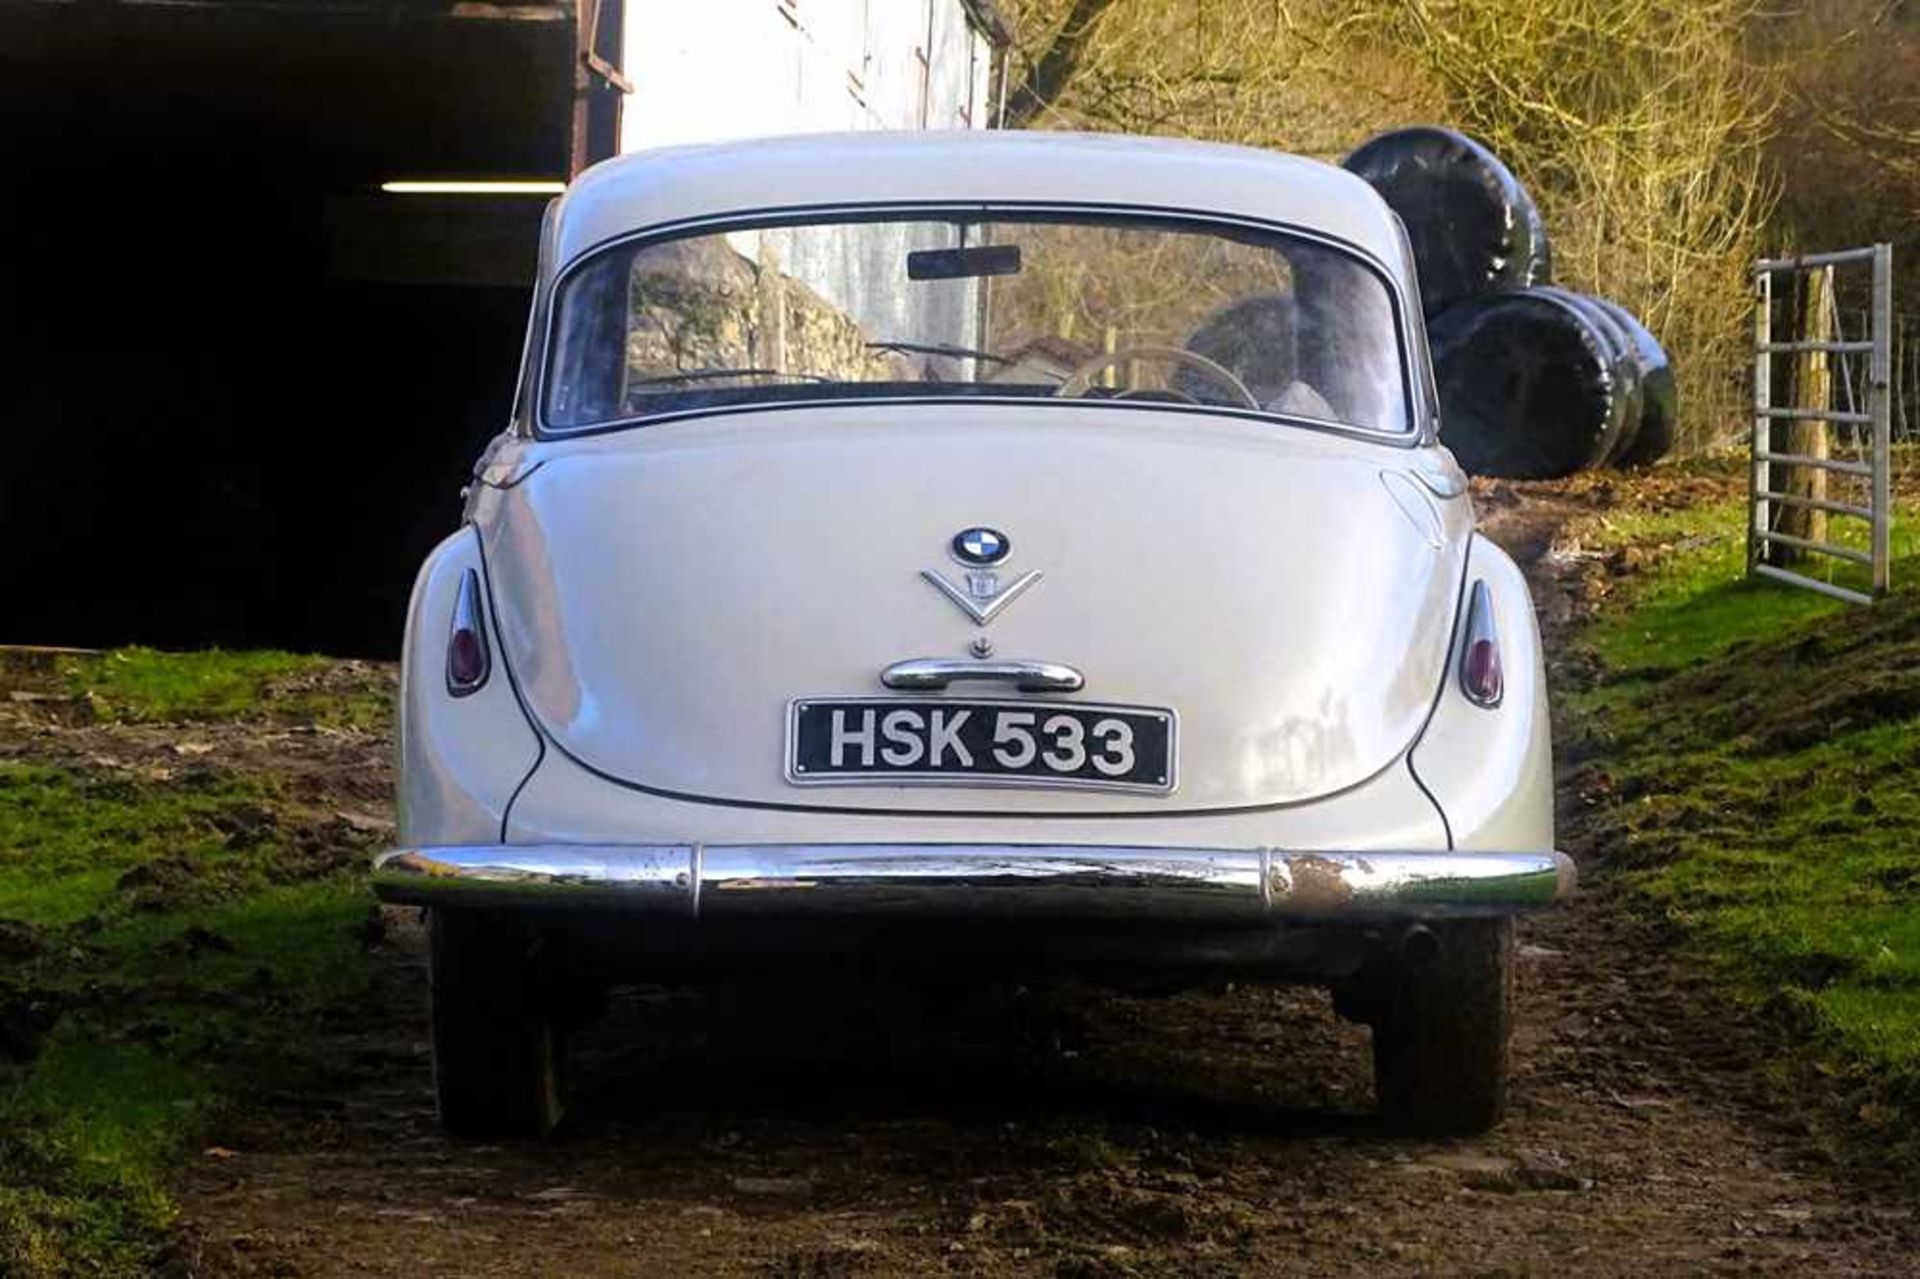 1957 BMW 502 Believed to be 1 of only 12 supplied new to the UK market - Image 9 of 64